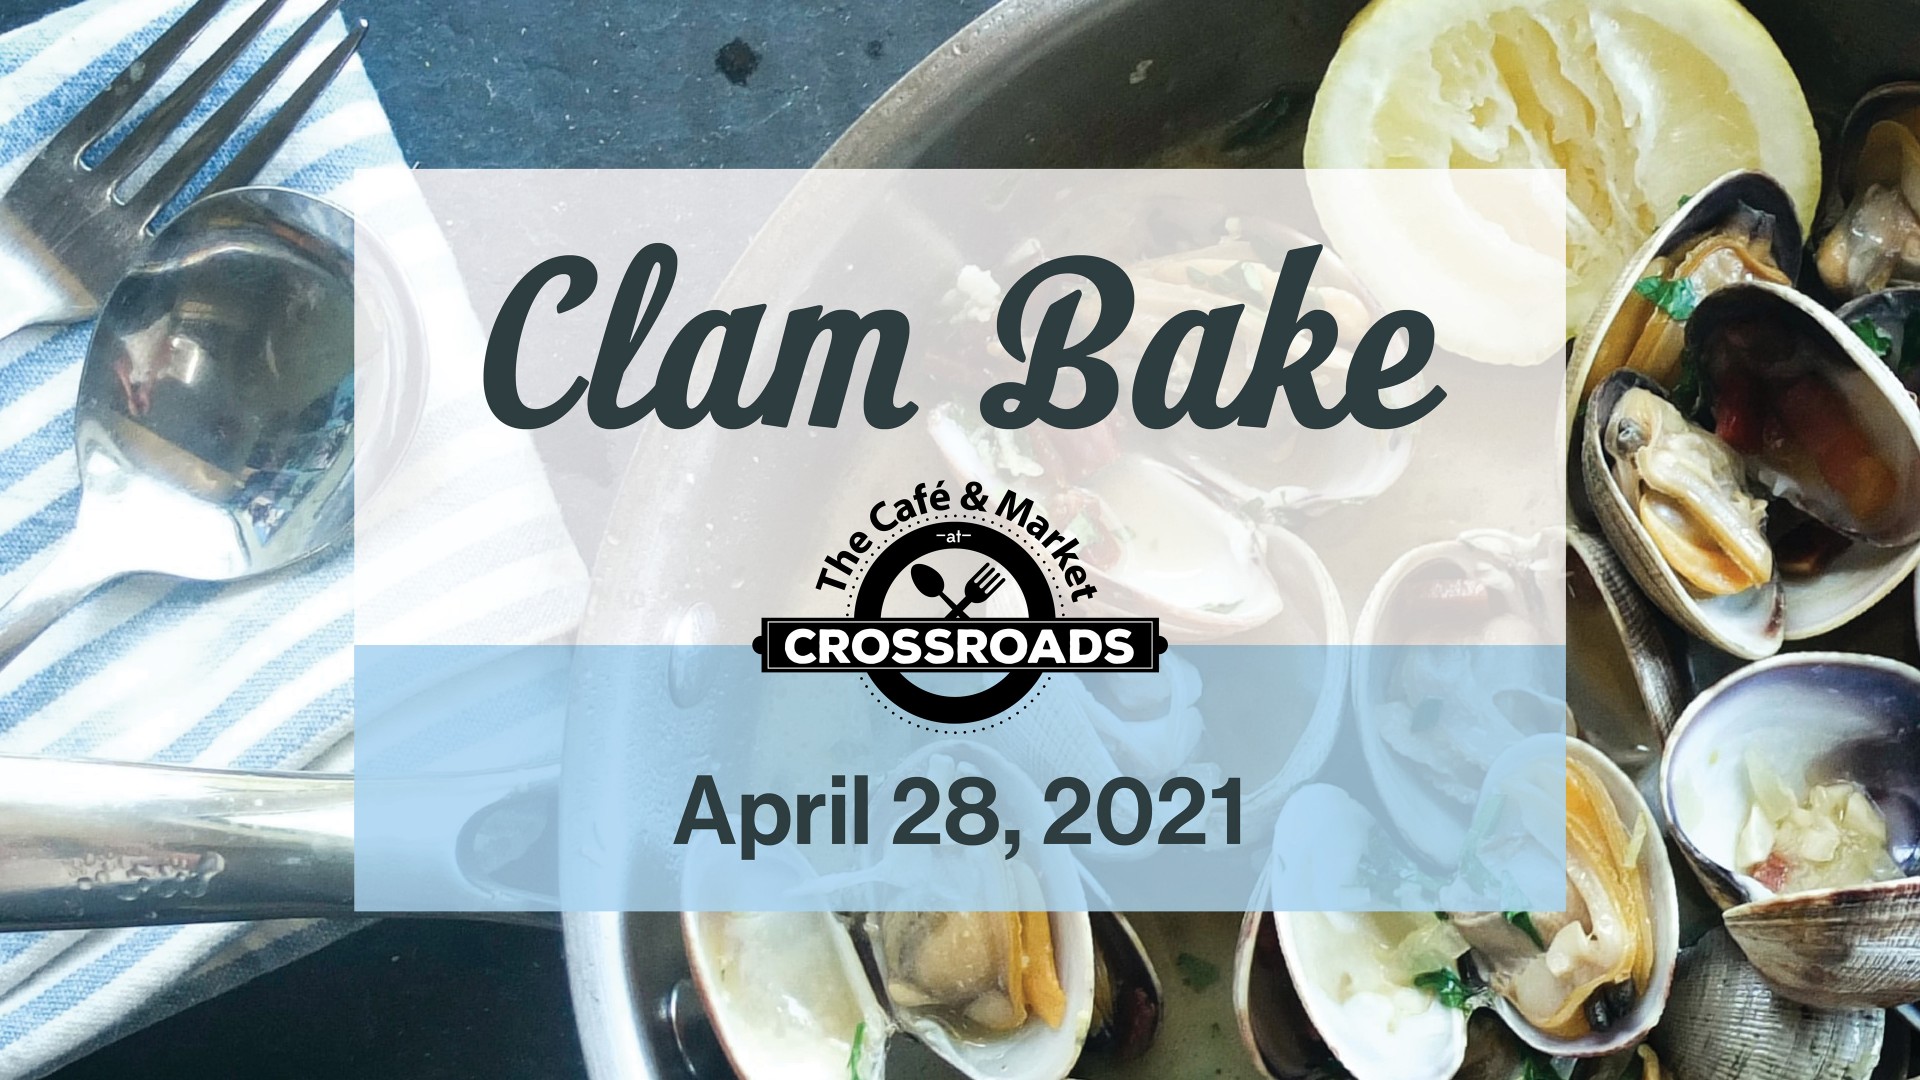 Blue tint background with open clams, lemon, and silverware. "Clam Bake on April 28, 2021 with Cafe and Market at Crossroads logo"